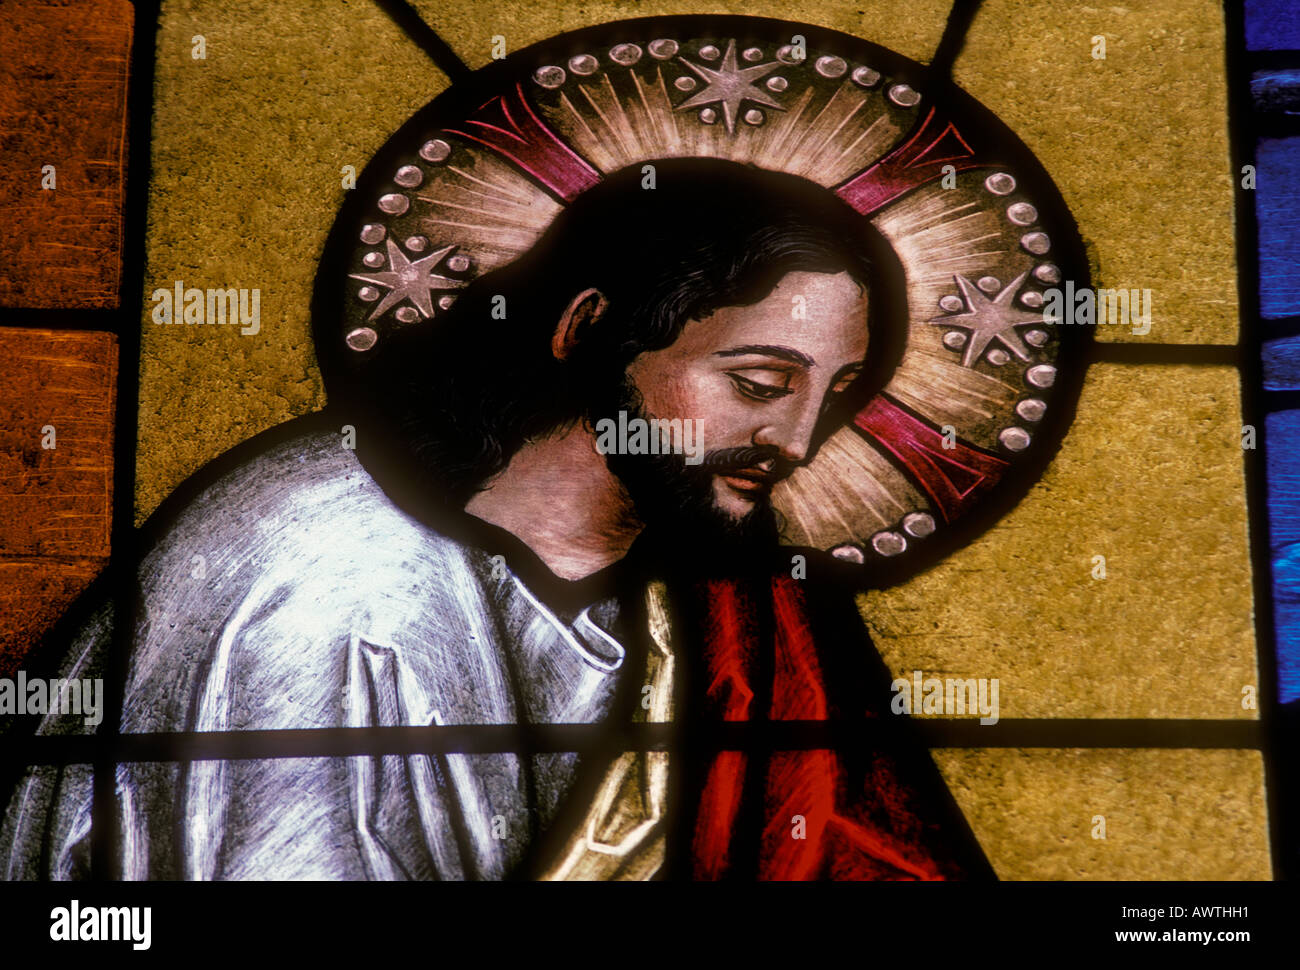 stained glass window, stained glass, Jesus Christ, King of the Jews, Greek Orthodox, San Francisco, California Stock Photo